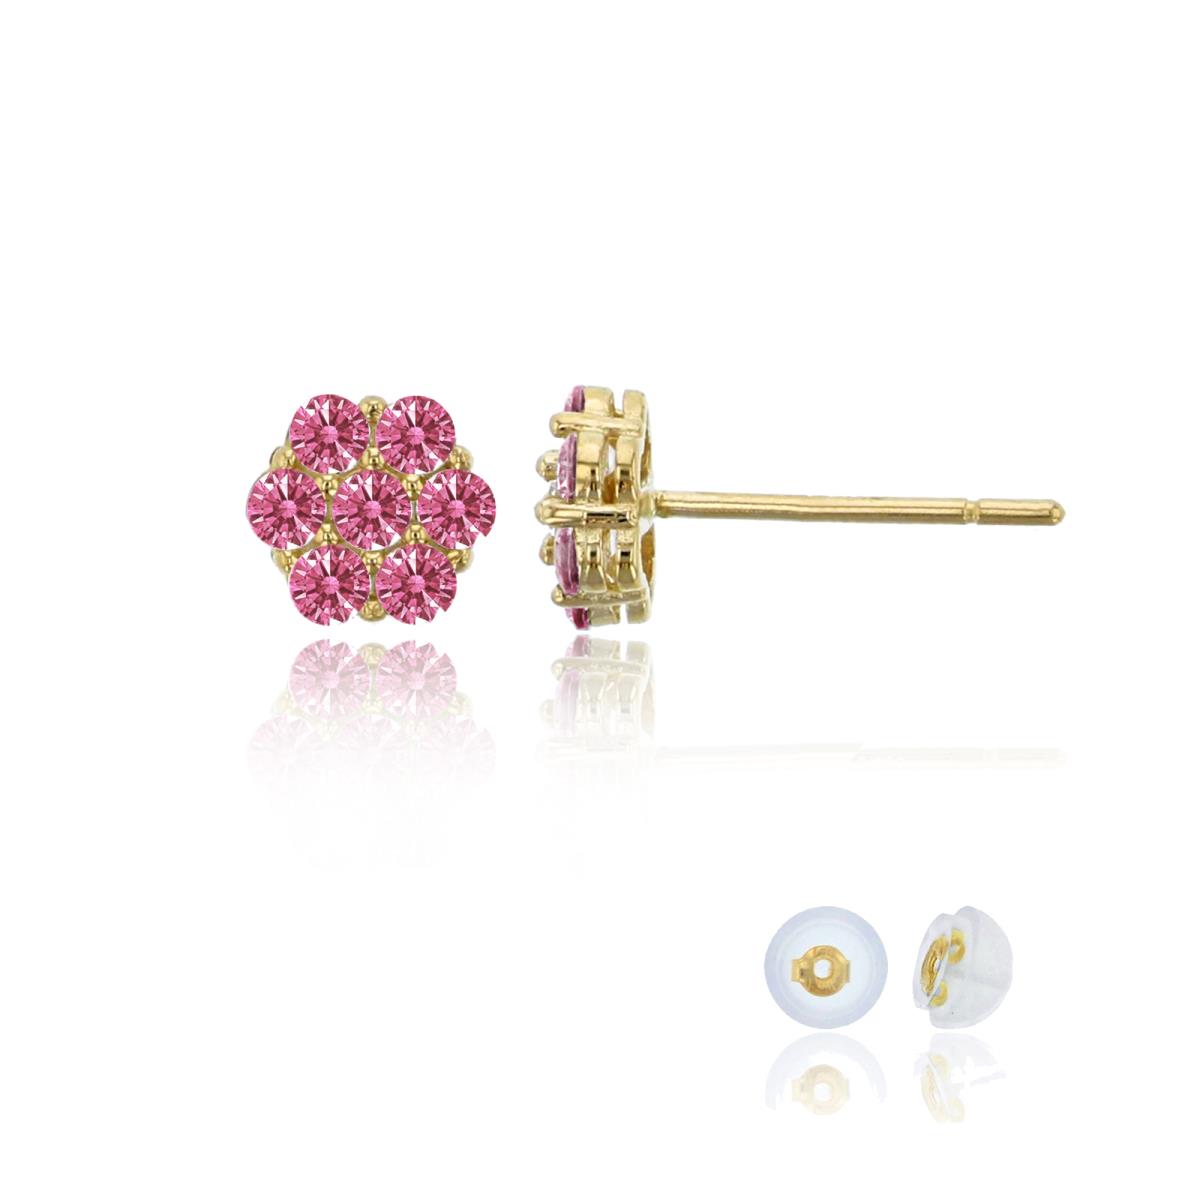 14K Yellow Gold Pave 1.75mm Rd Red Swarovski Zirconia Cluster Stud Earring